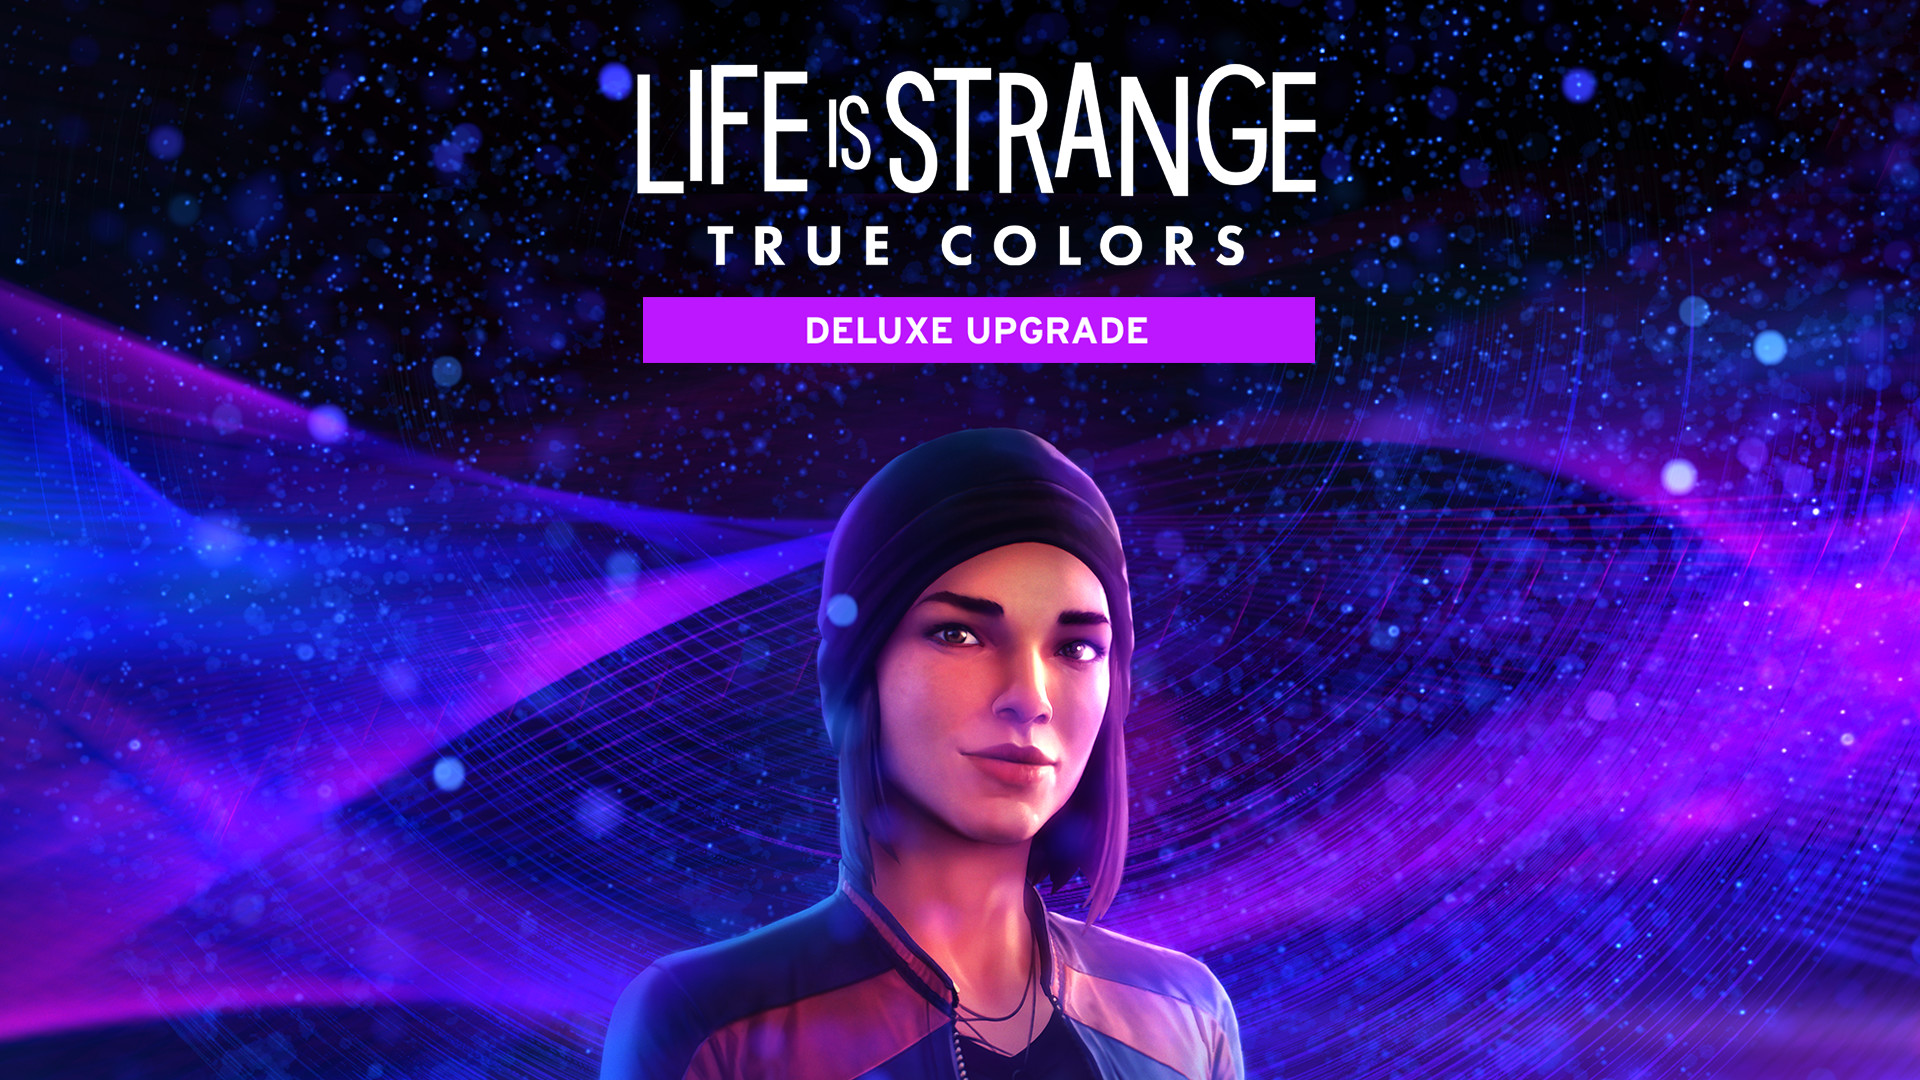 Save 70% on Life is Strange: True Colors on Steam